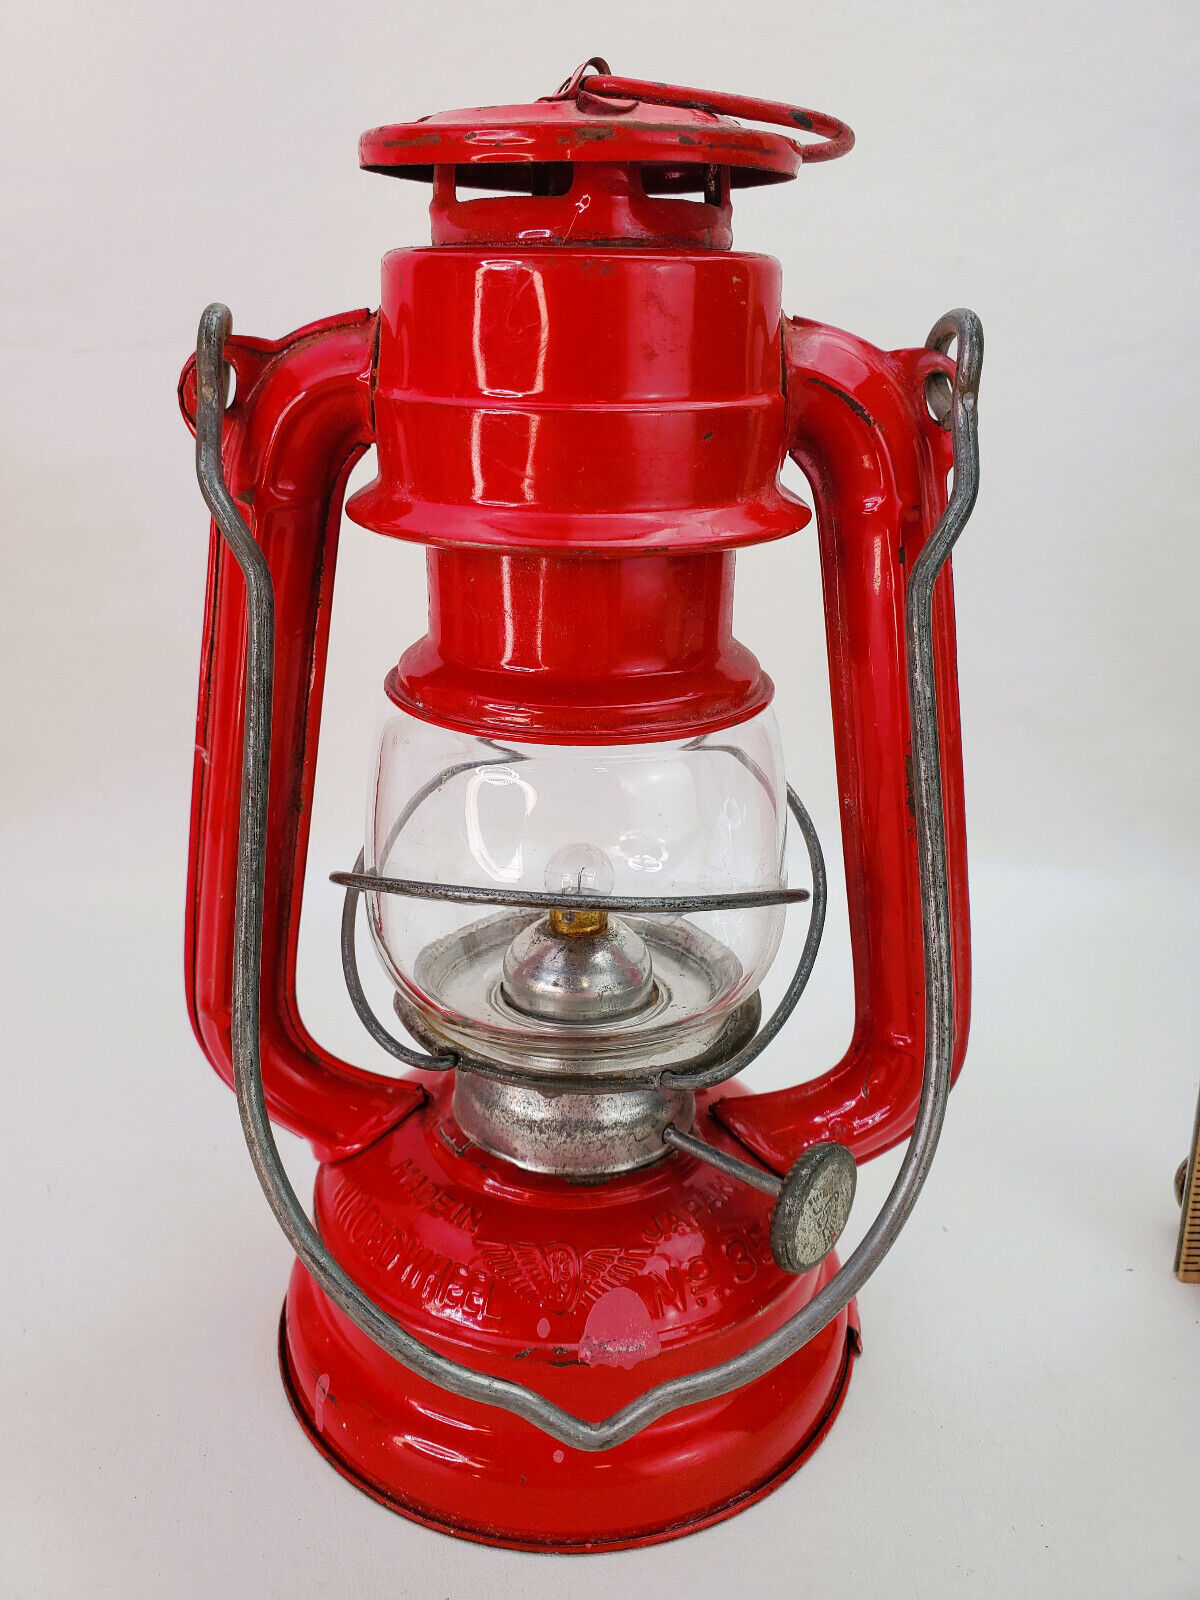 RARE Vintage Winged Wheel no. 350 Lantern Battery Operated Red Tested Works